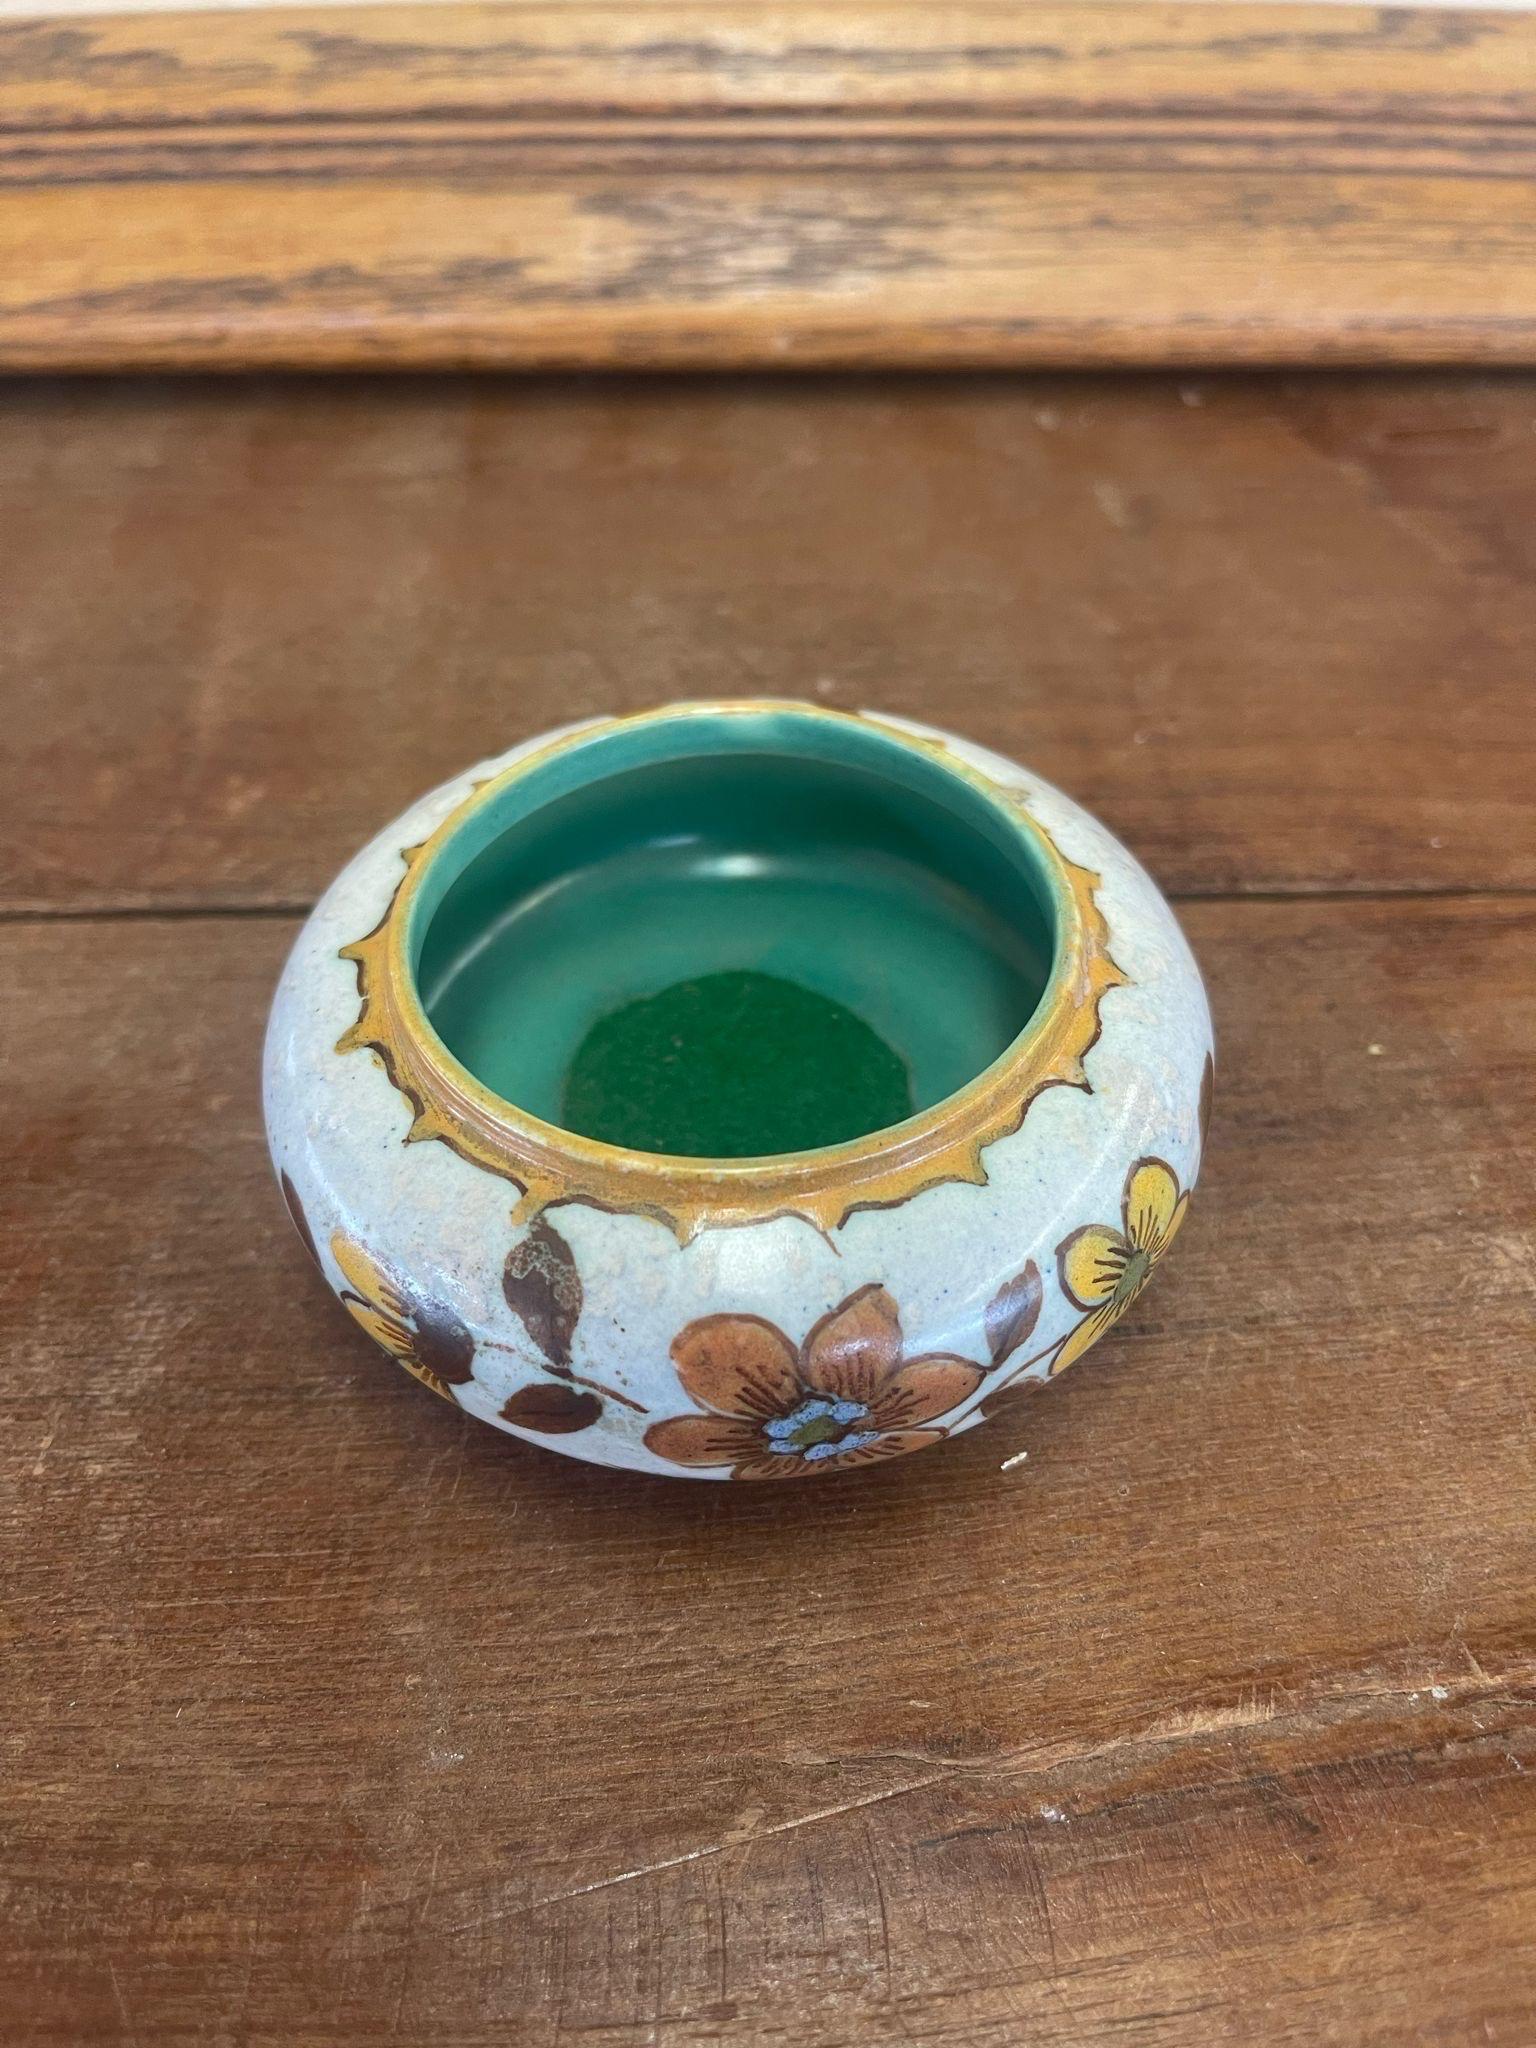 Traditional design atop this unique ceramic piece. Makers mark on the bottom, stating that was made in Holland. Circa 1903. Vintage Condition Consistent with Age as Pictured.

Dimensions. 5 W ; 4 1/2 D ; 2 H